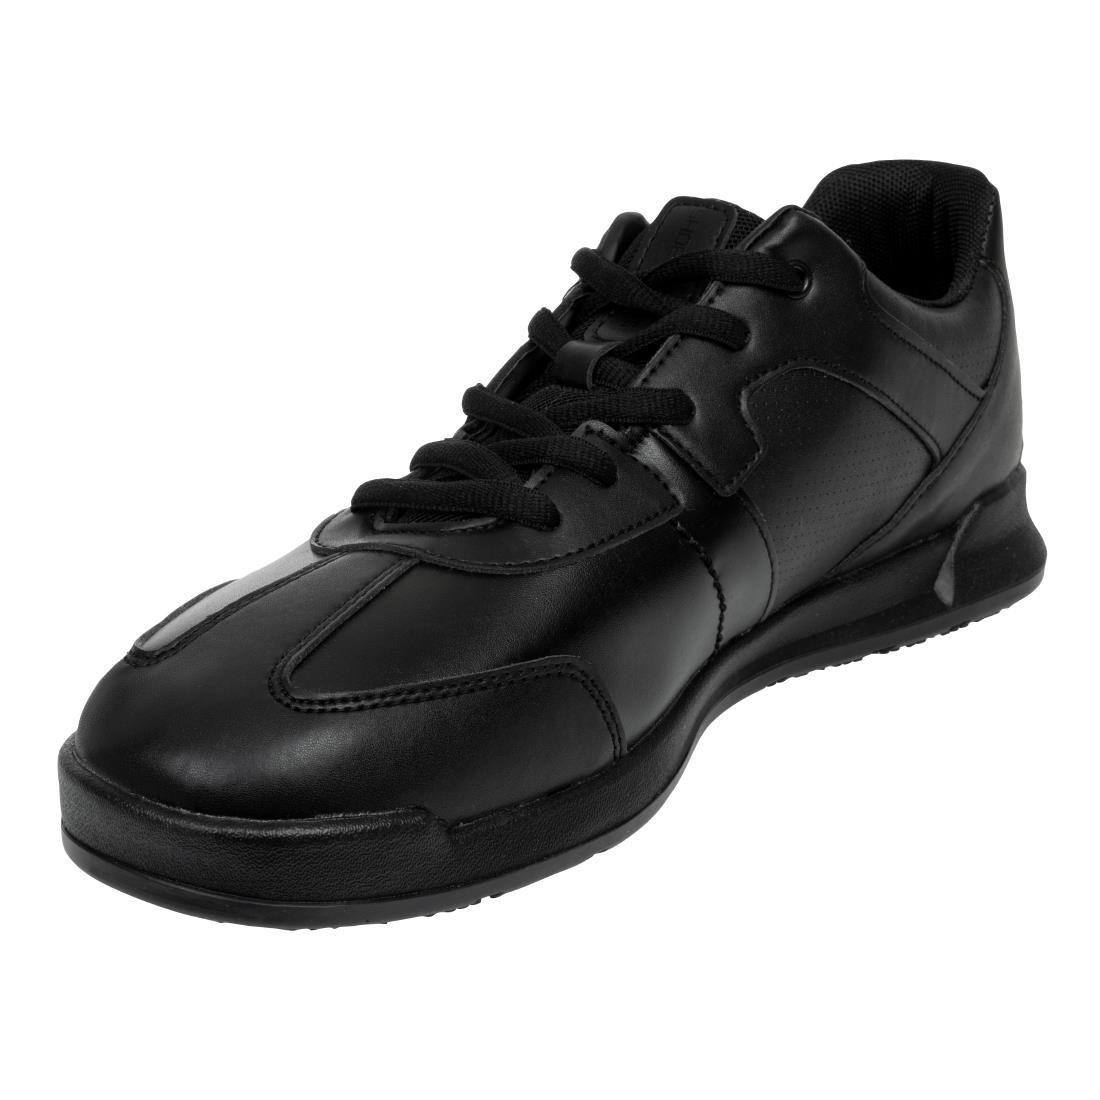 BB585-41 Shoes for Crews Freestyle Trainers Black Size 41